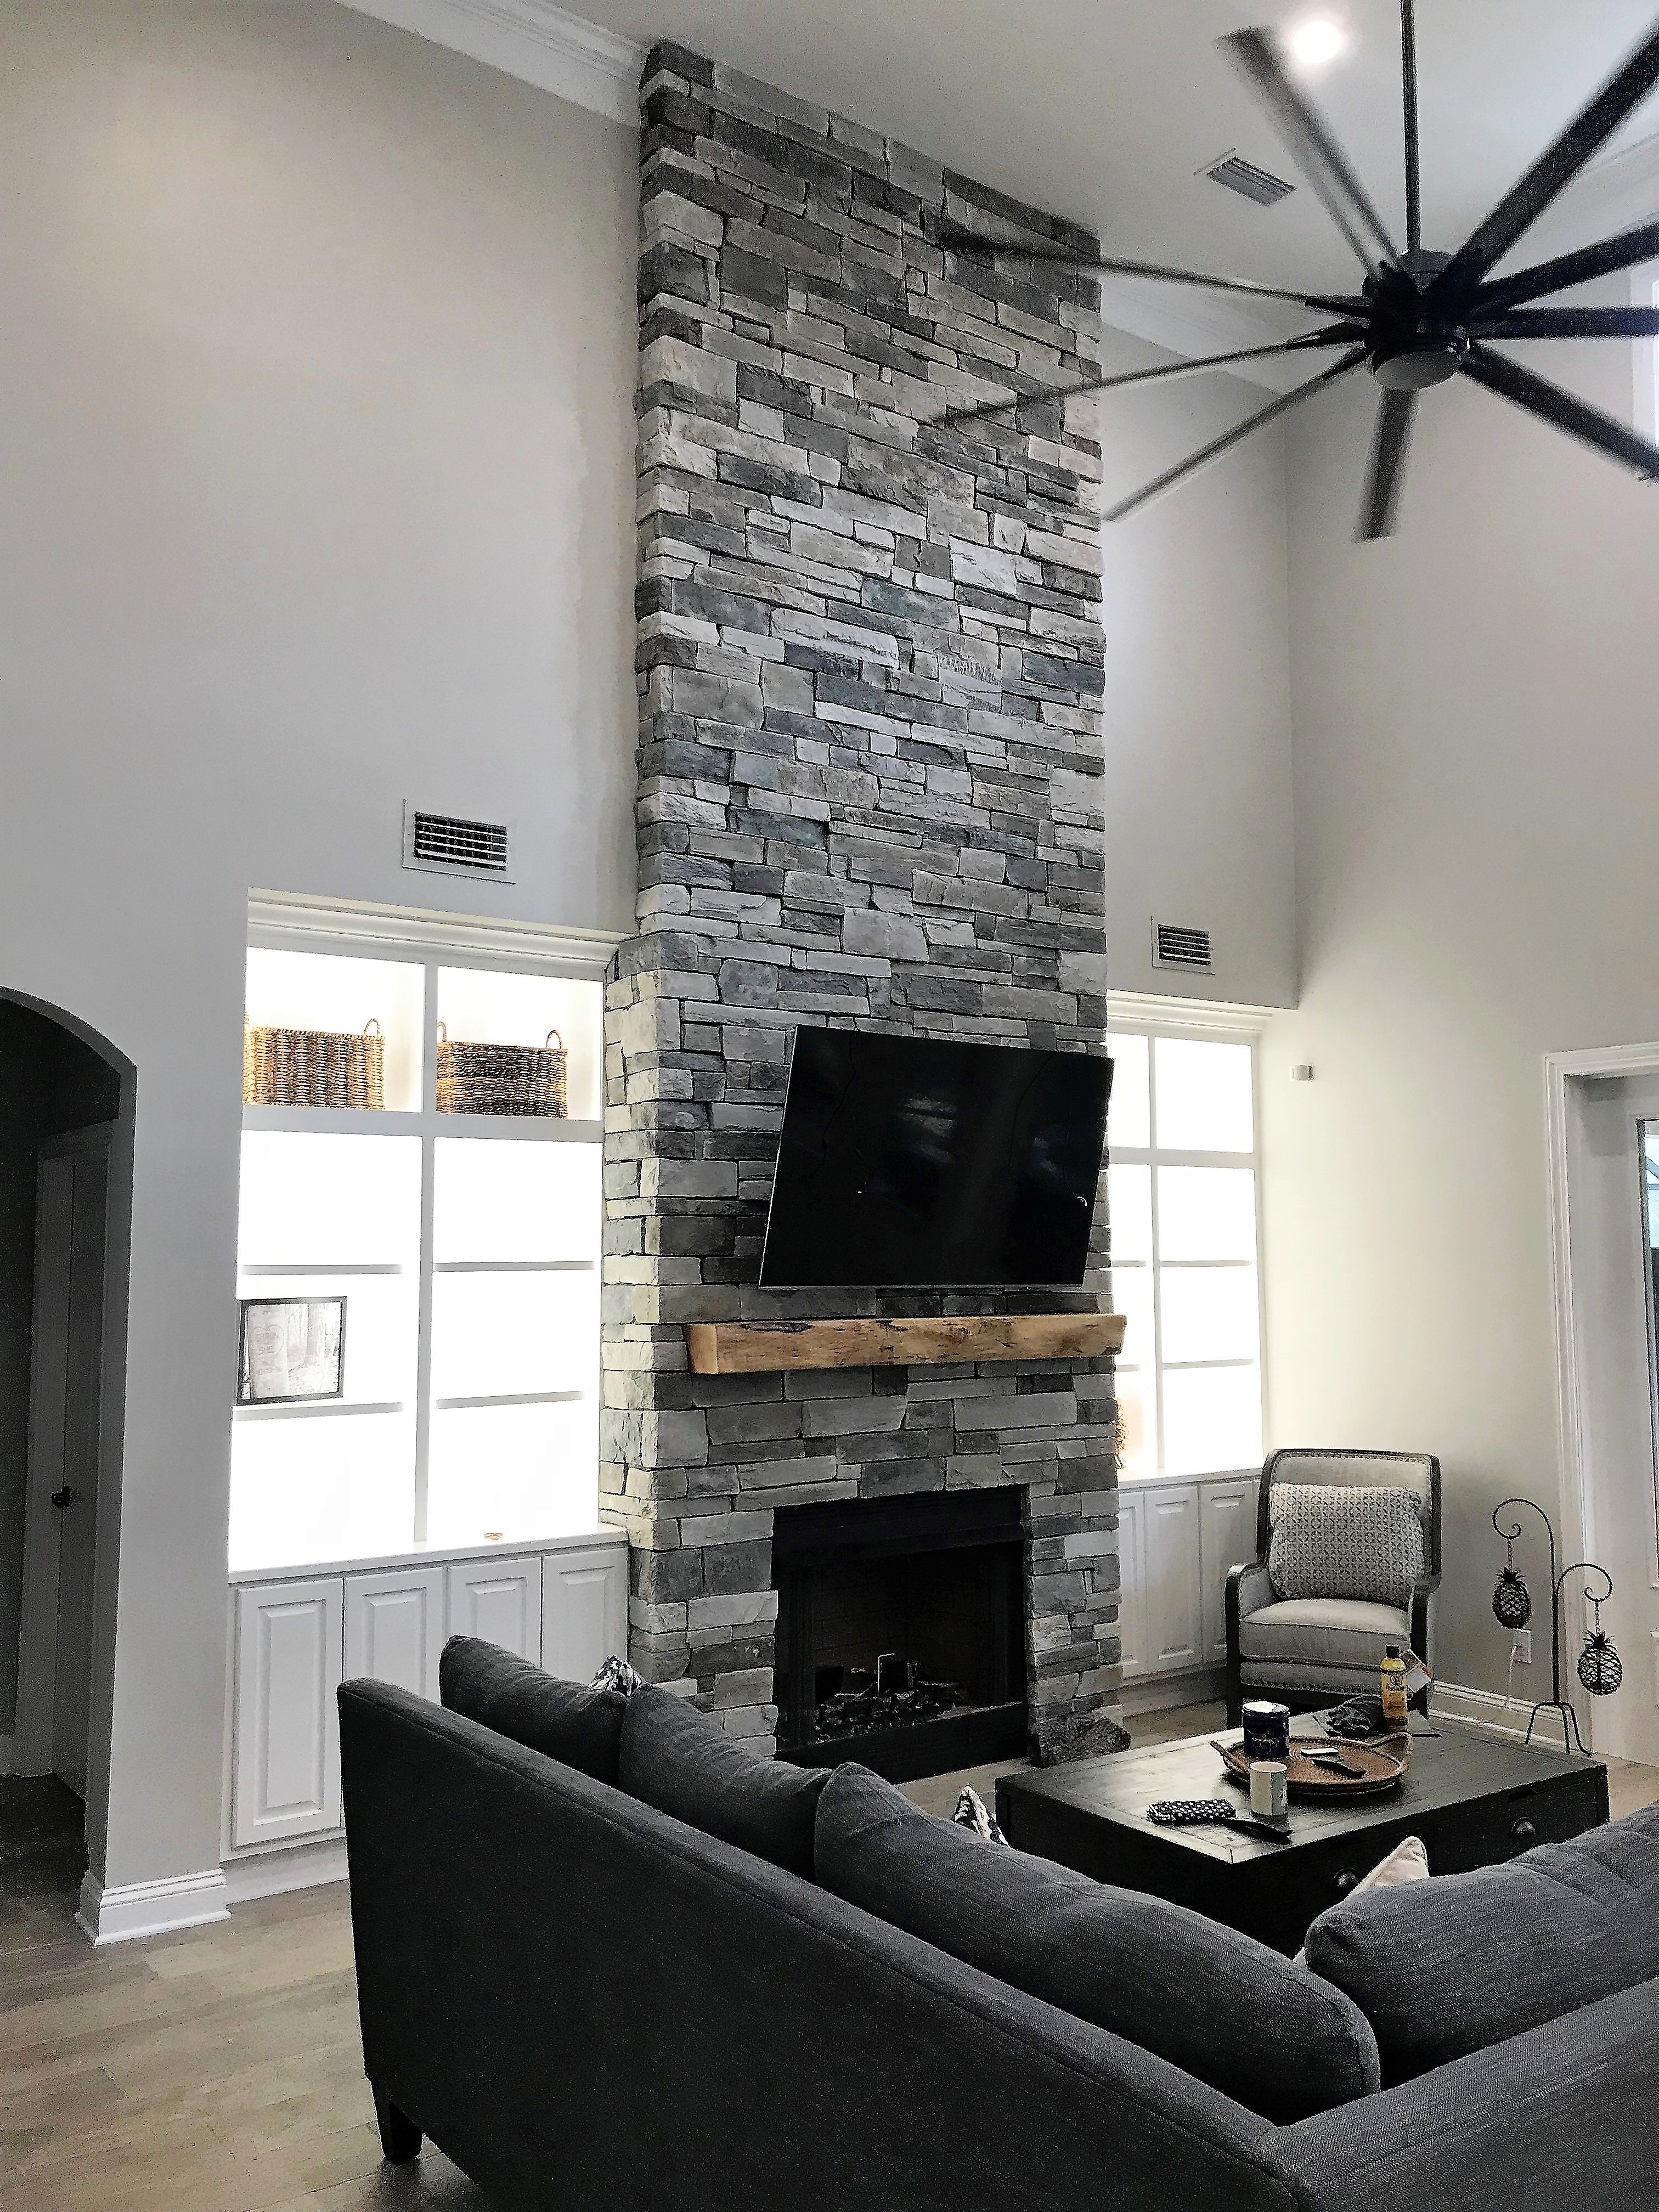 Ledgestone Fireplace Inspirational Another Pleted Project Done by Project Manager Travis